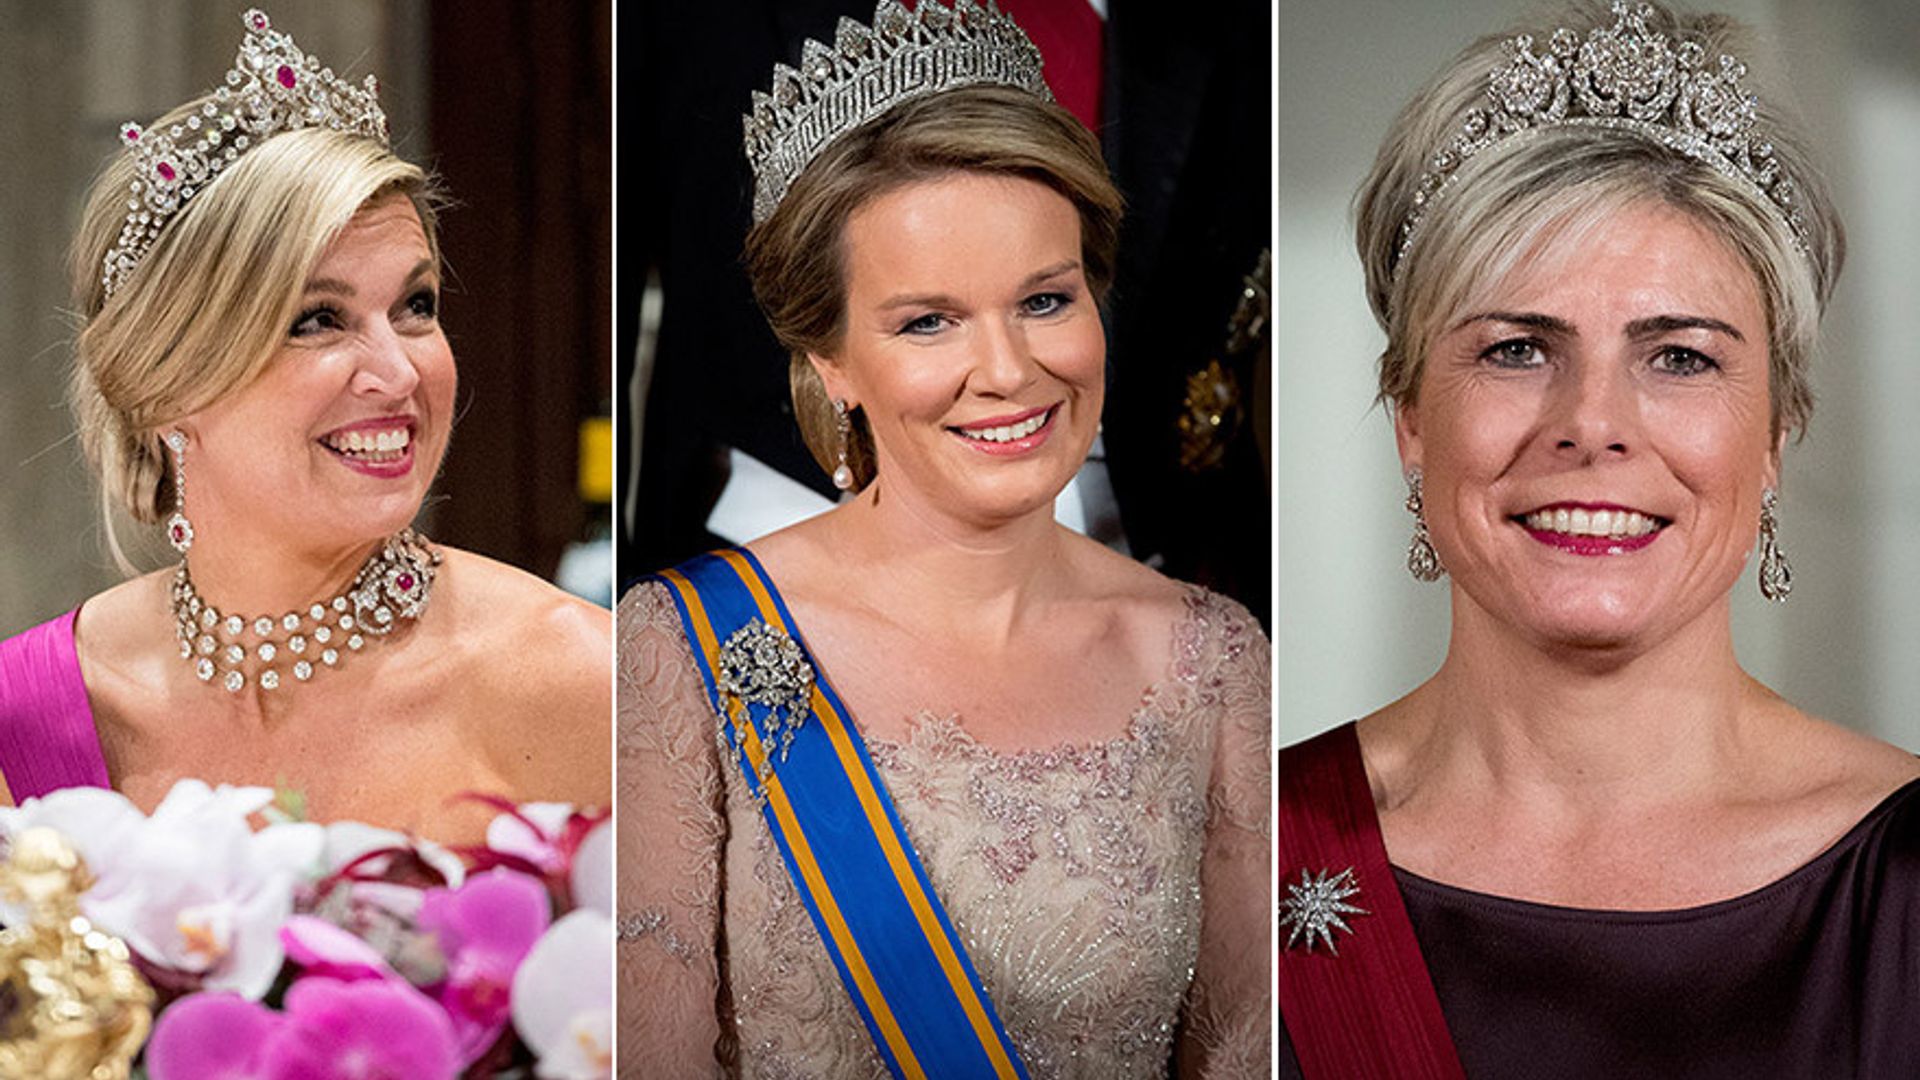 Queen Maxima, Queen Mathilde and more royal ladies show off their tiaras at gala dinner